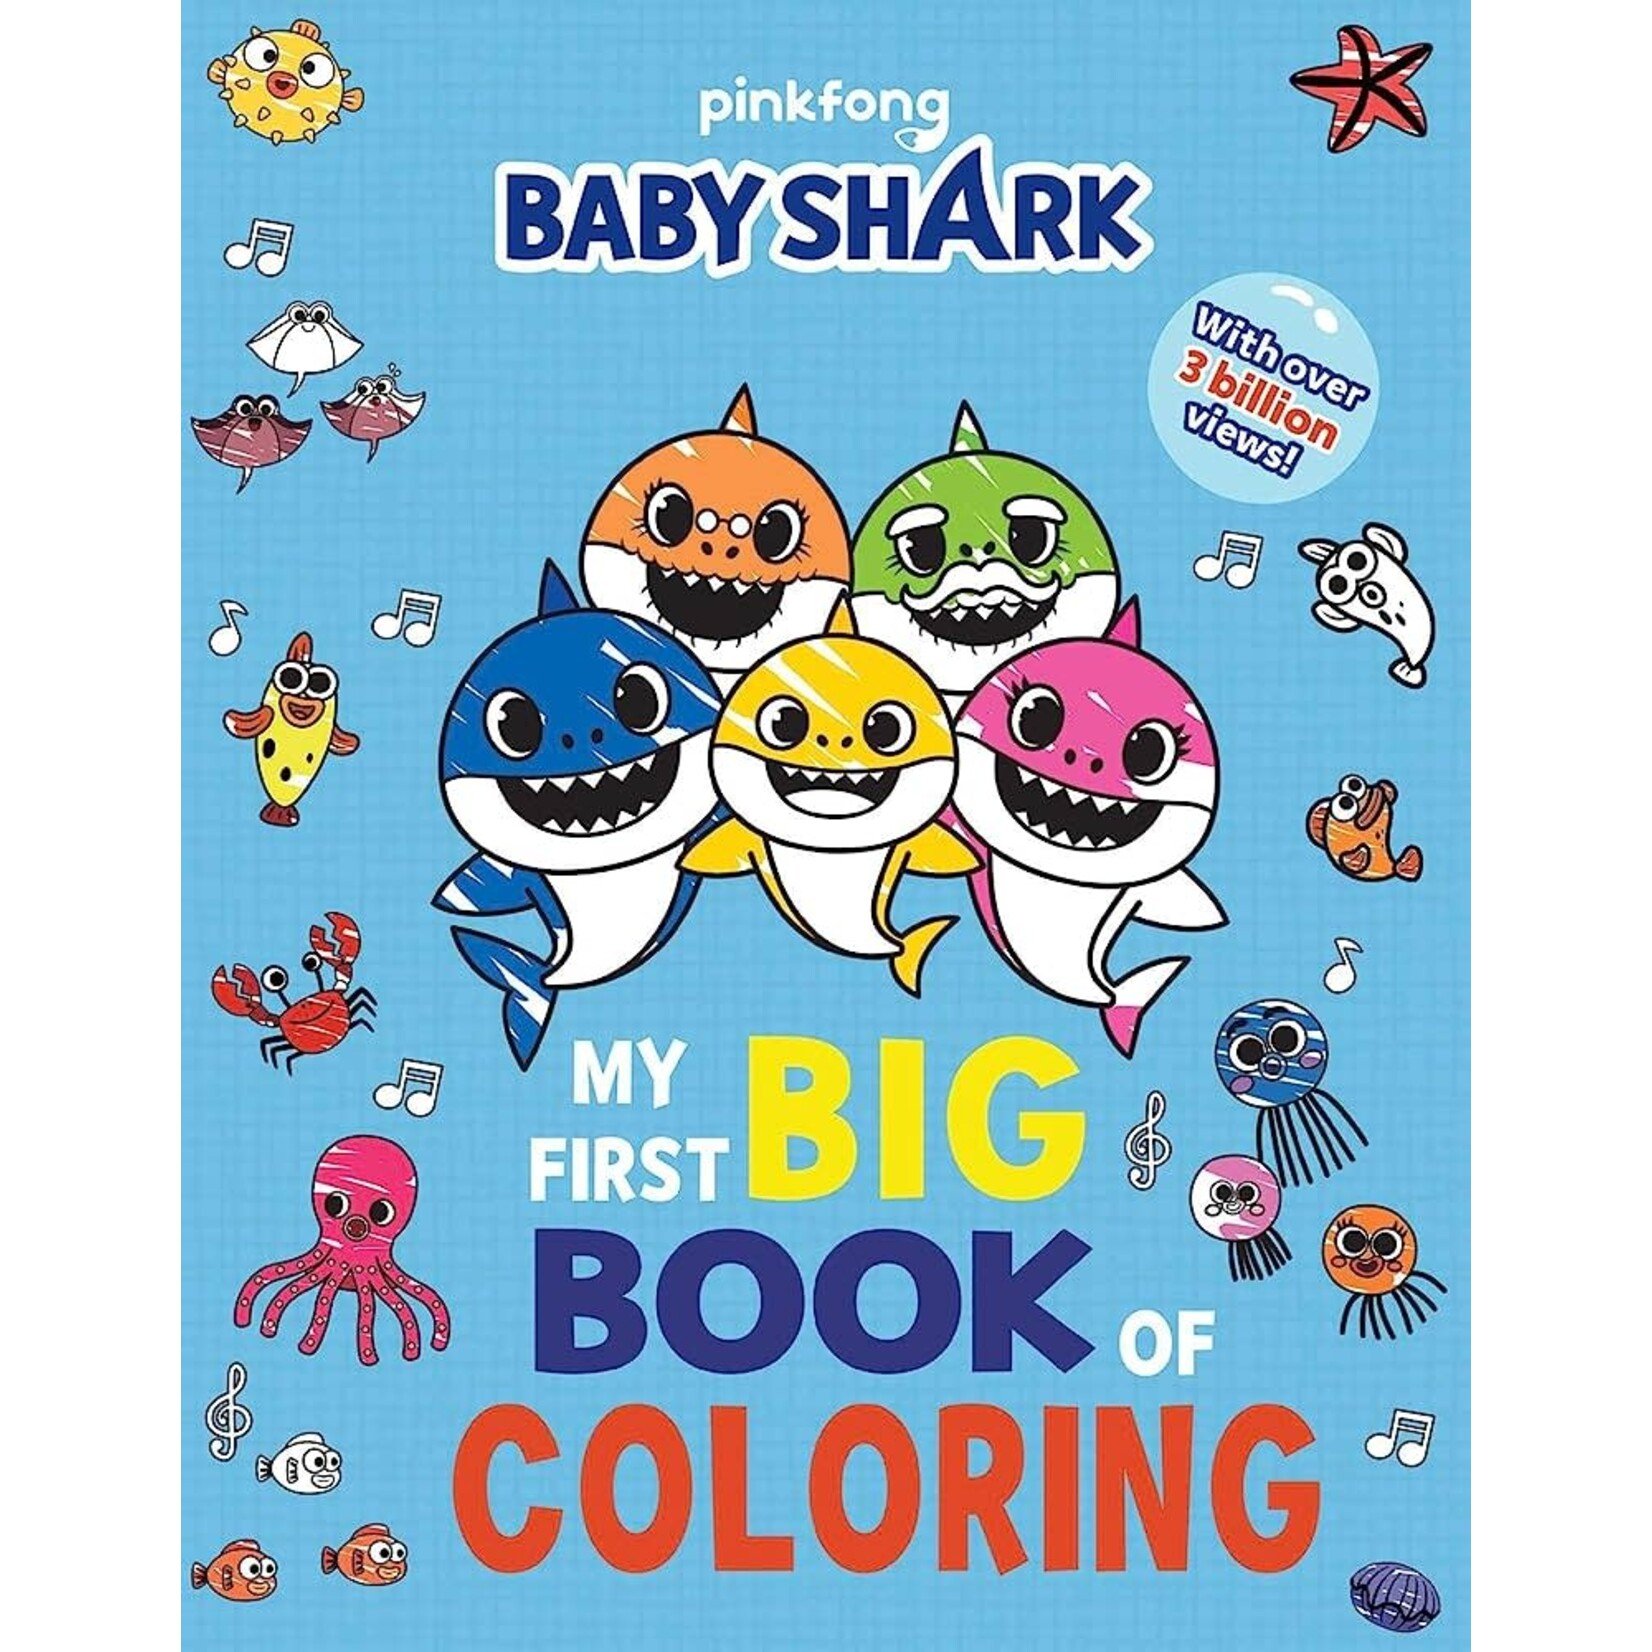 Kicks　Baby　Big　My　Book　Coloring:　of　Giggles　First　and　Shark　Baby　Boutique